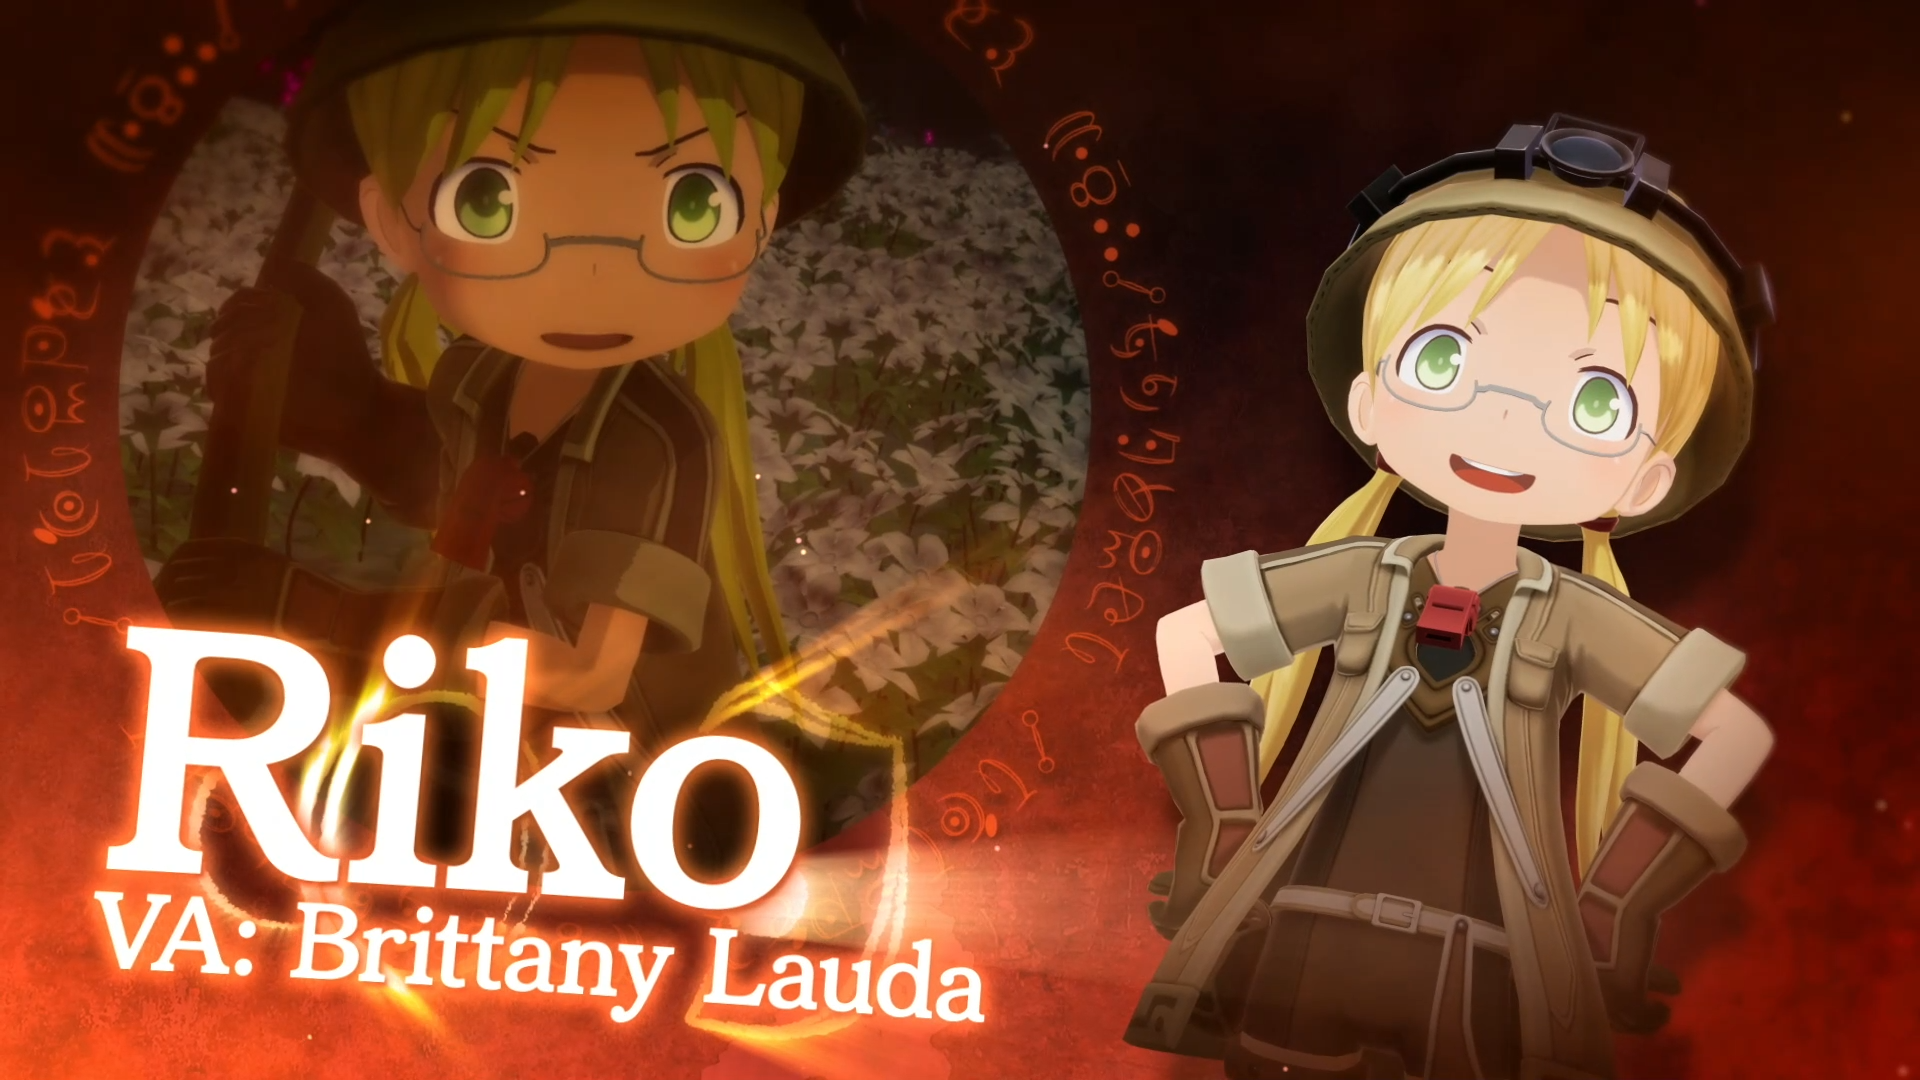 Made in Abyss releases 3rd promo video for Season 2, reveals exact